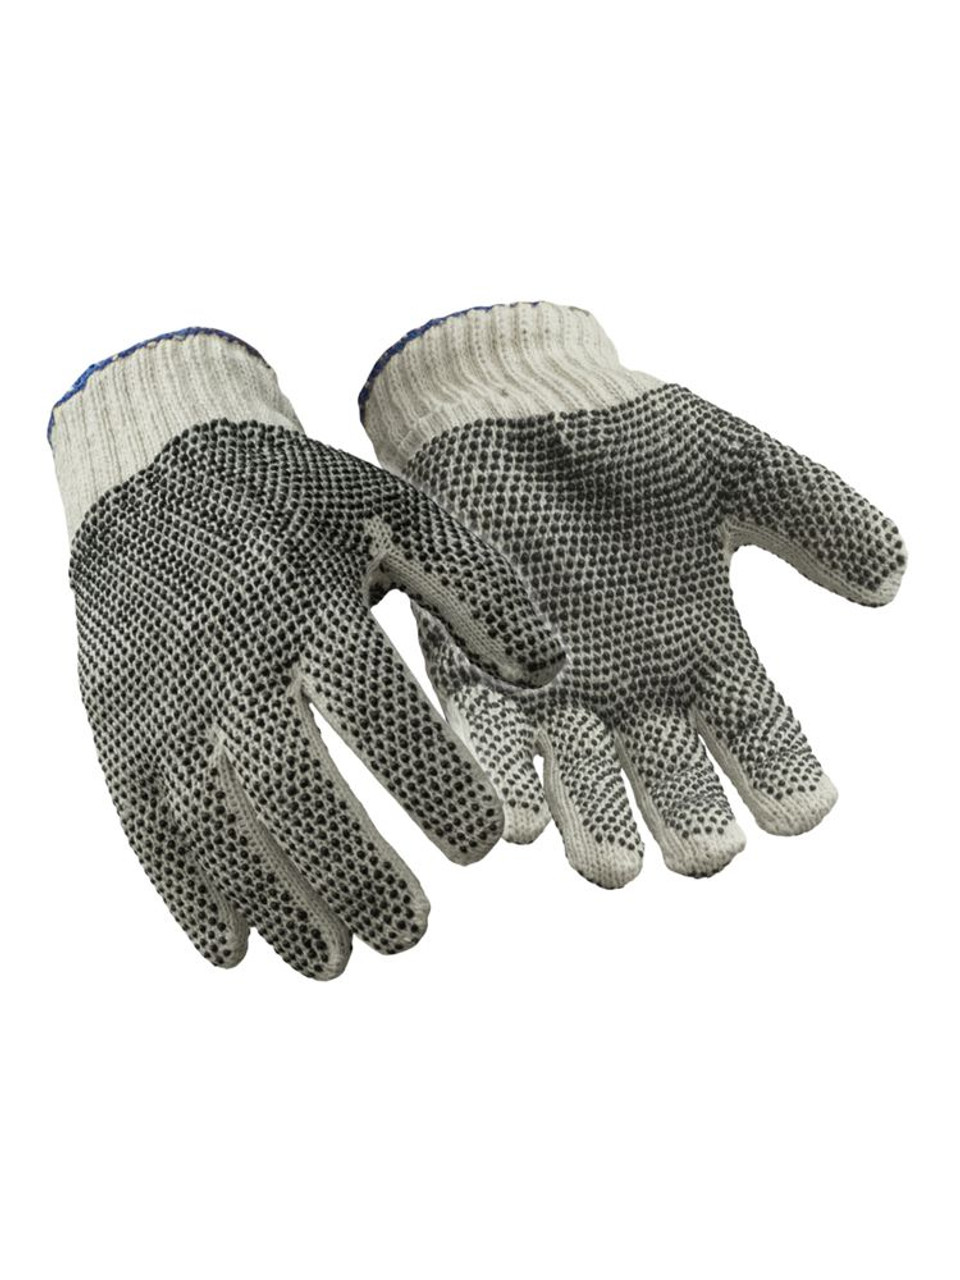 Dot Grip Work Gloves Cotton/Nylon Glove with Blue PVC Grip, One Sided White